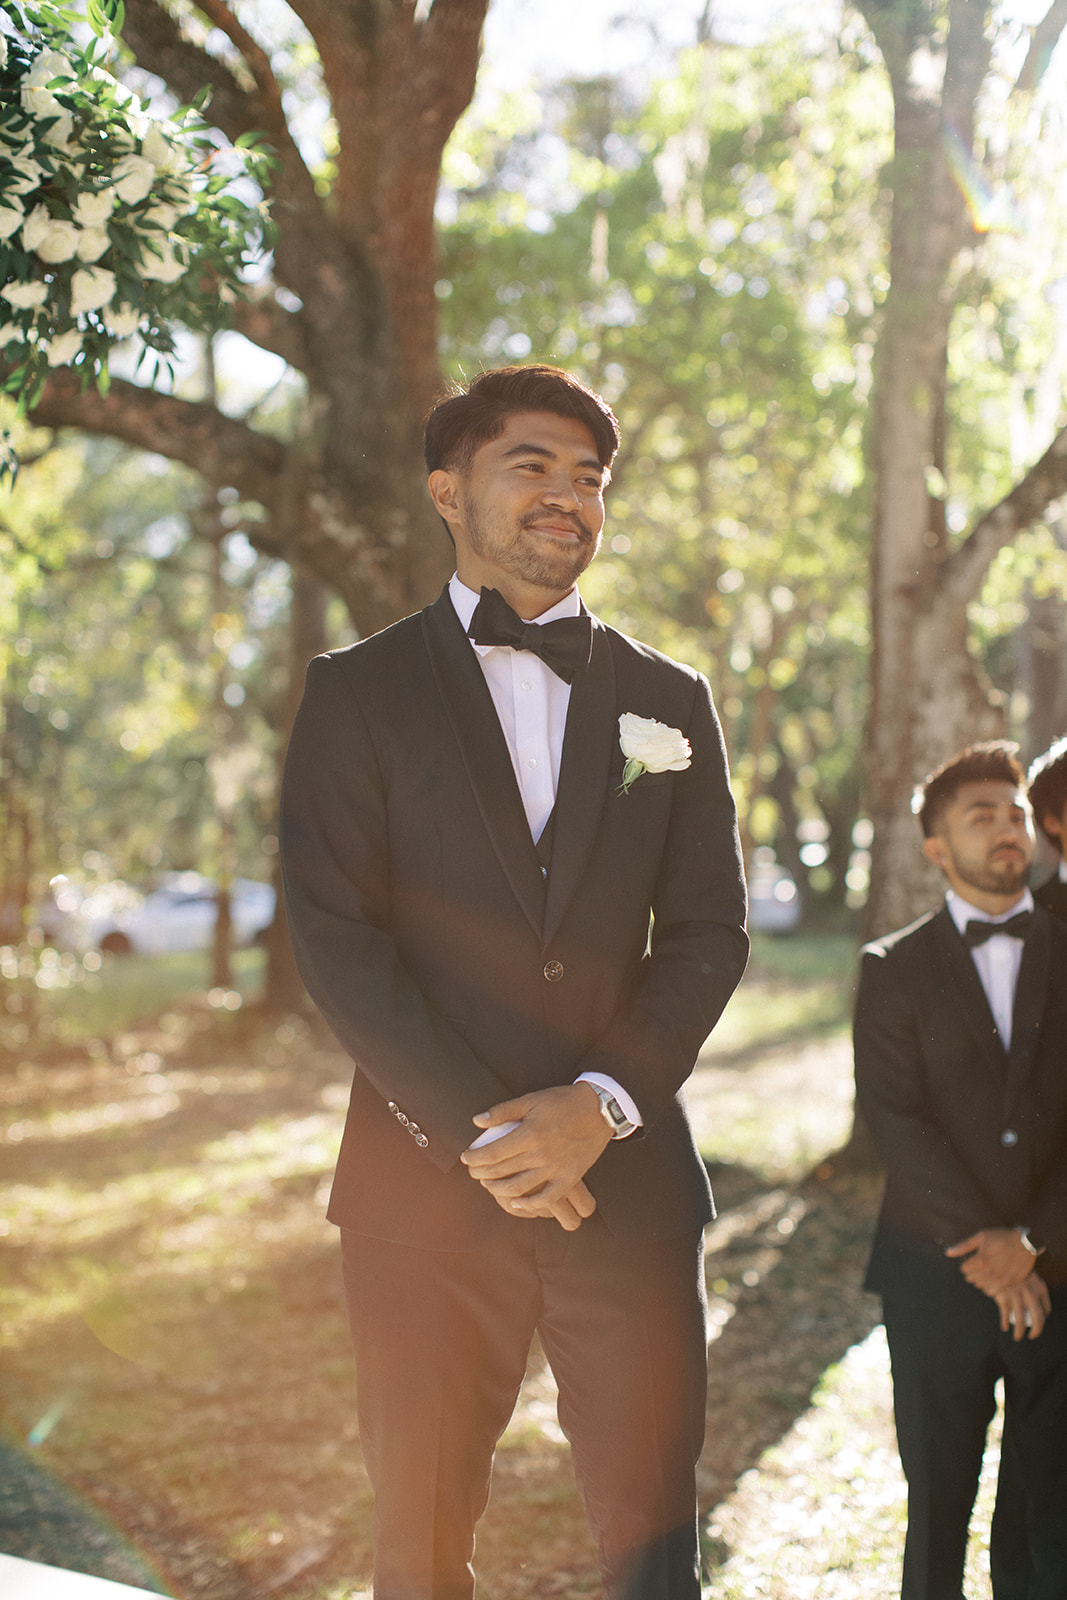 Beatiful reaction from groom as bride walks down the aisle